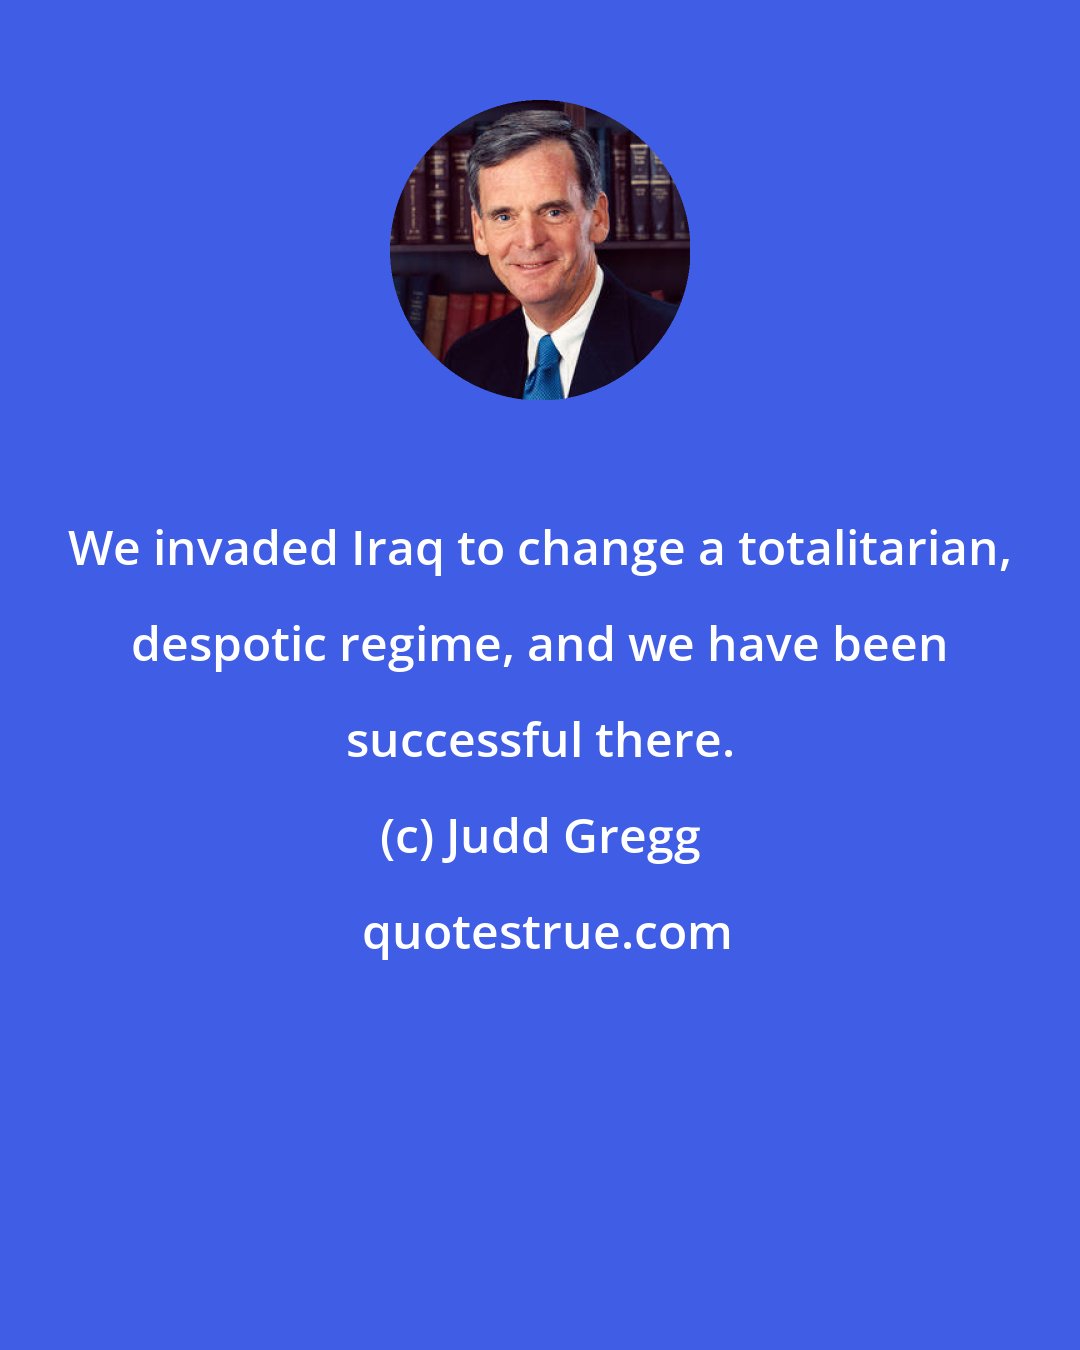 Judd Gregg: We invaded Iraq to change a totalitarian, despotic regime, and we have been successful there.